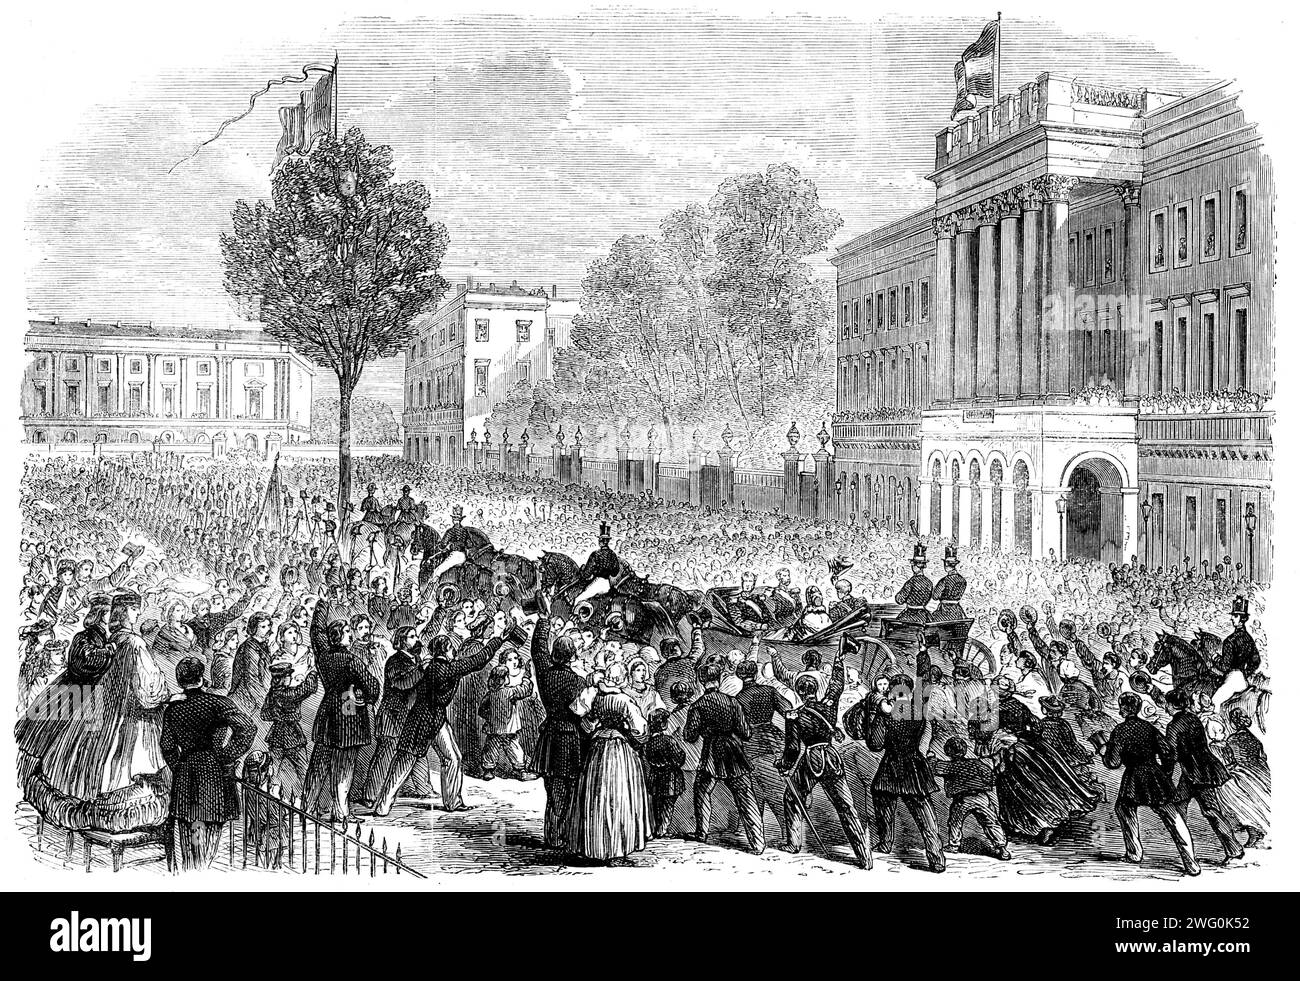 King Leopold's public entry into Brussels&#x2026;arrival of His Majesty at the palace - from a sketch by Mr. Hendrikx, 1862. 'The population...thronged the roads and streets appointed for the Royal route...The King, though somewhat pale, looked remarkably well and robust, considering the length and nature of his painful malady. He seemed at times almost overcome by the affectionate manifestations of welcome which greeted him on all sides...The whole scene was one of surpassing brilliancy, the houses and trees being profusely ornamented with the national colours...Salvoes of artillery, and the Stock Photo